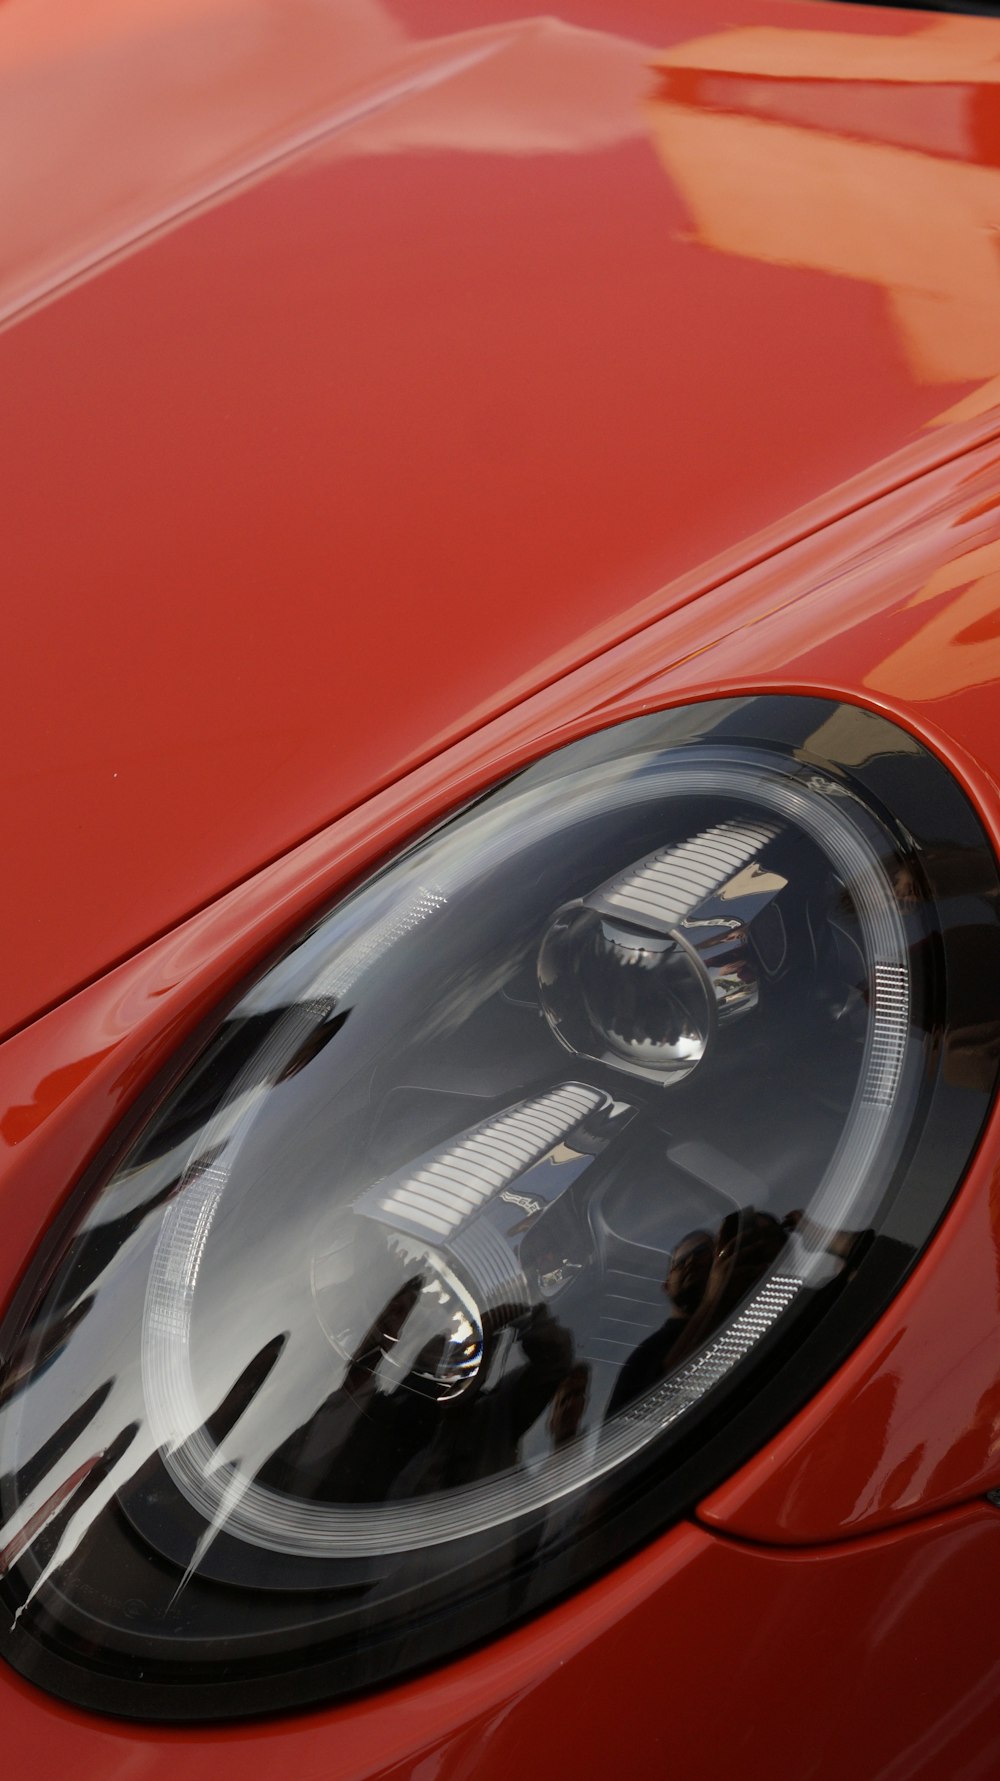 a close up of a red sports car headlight